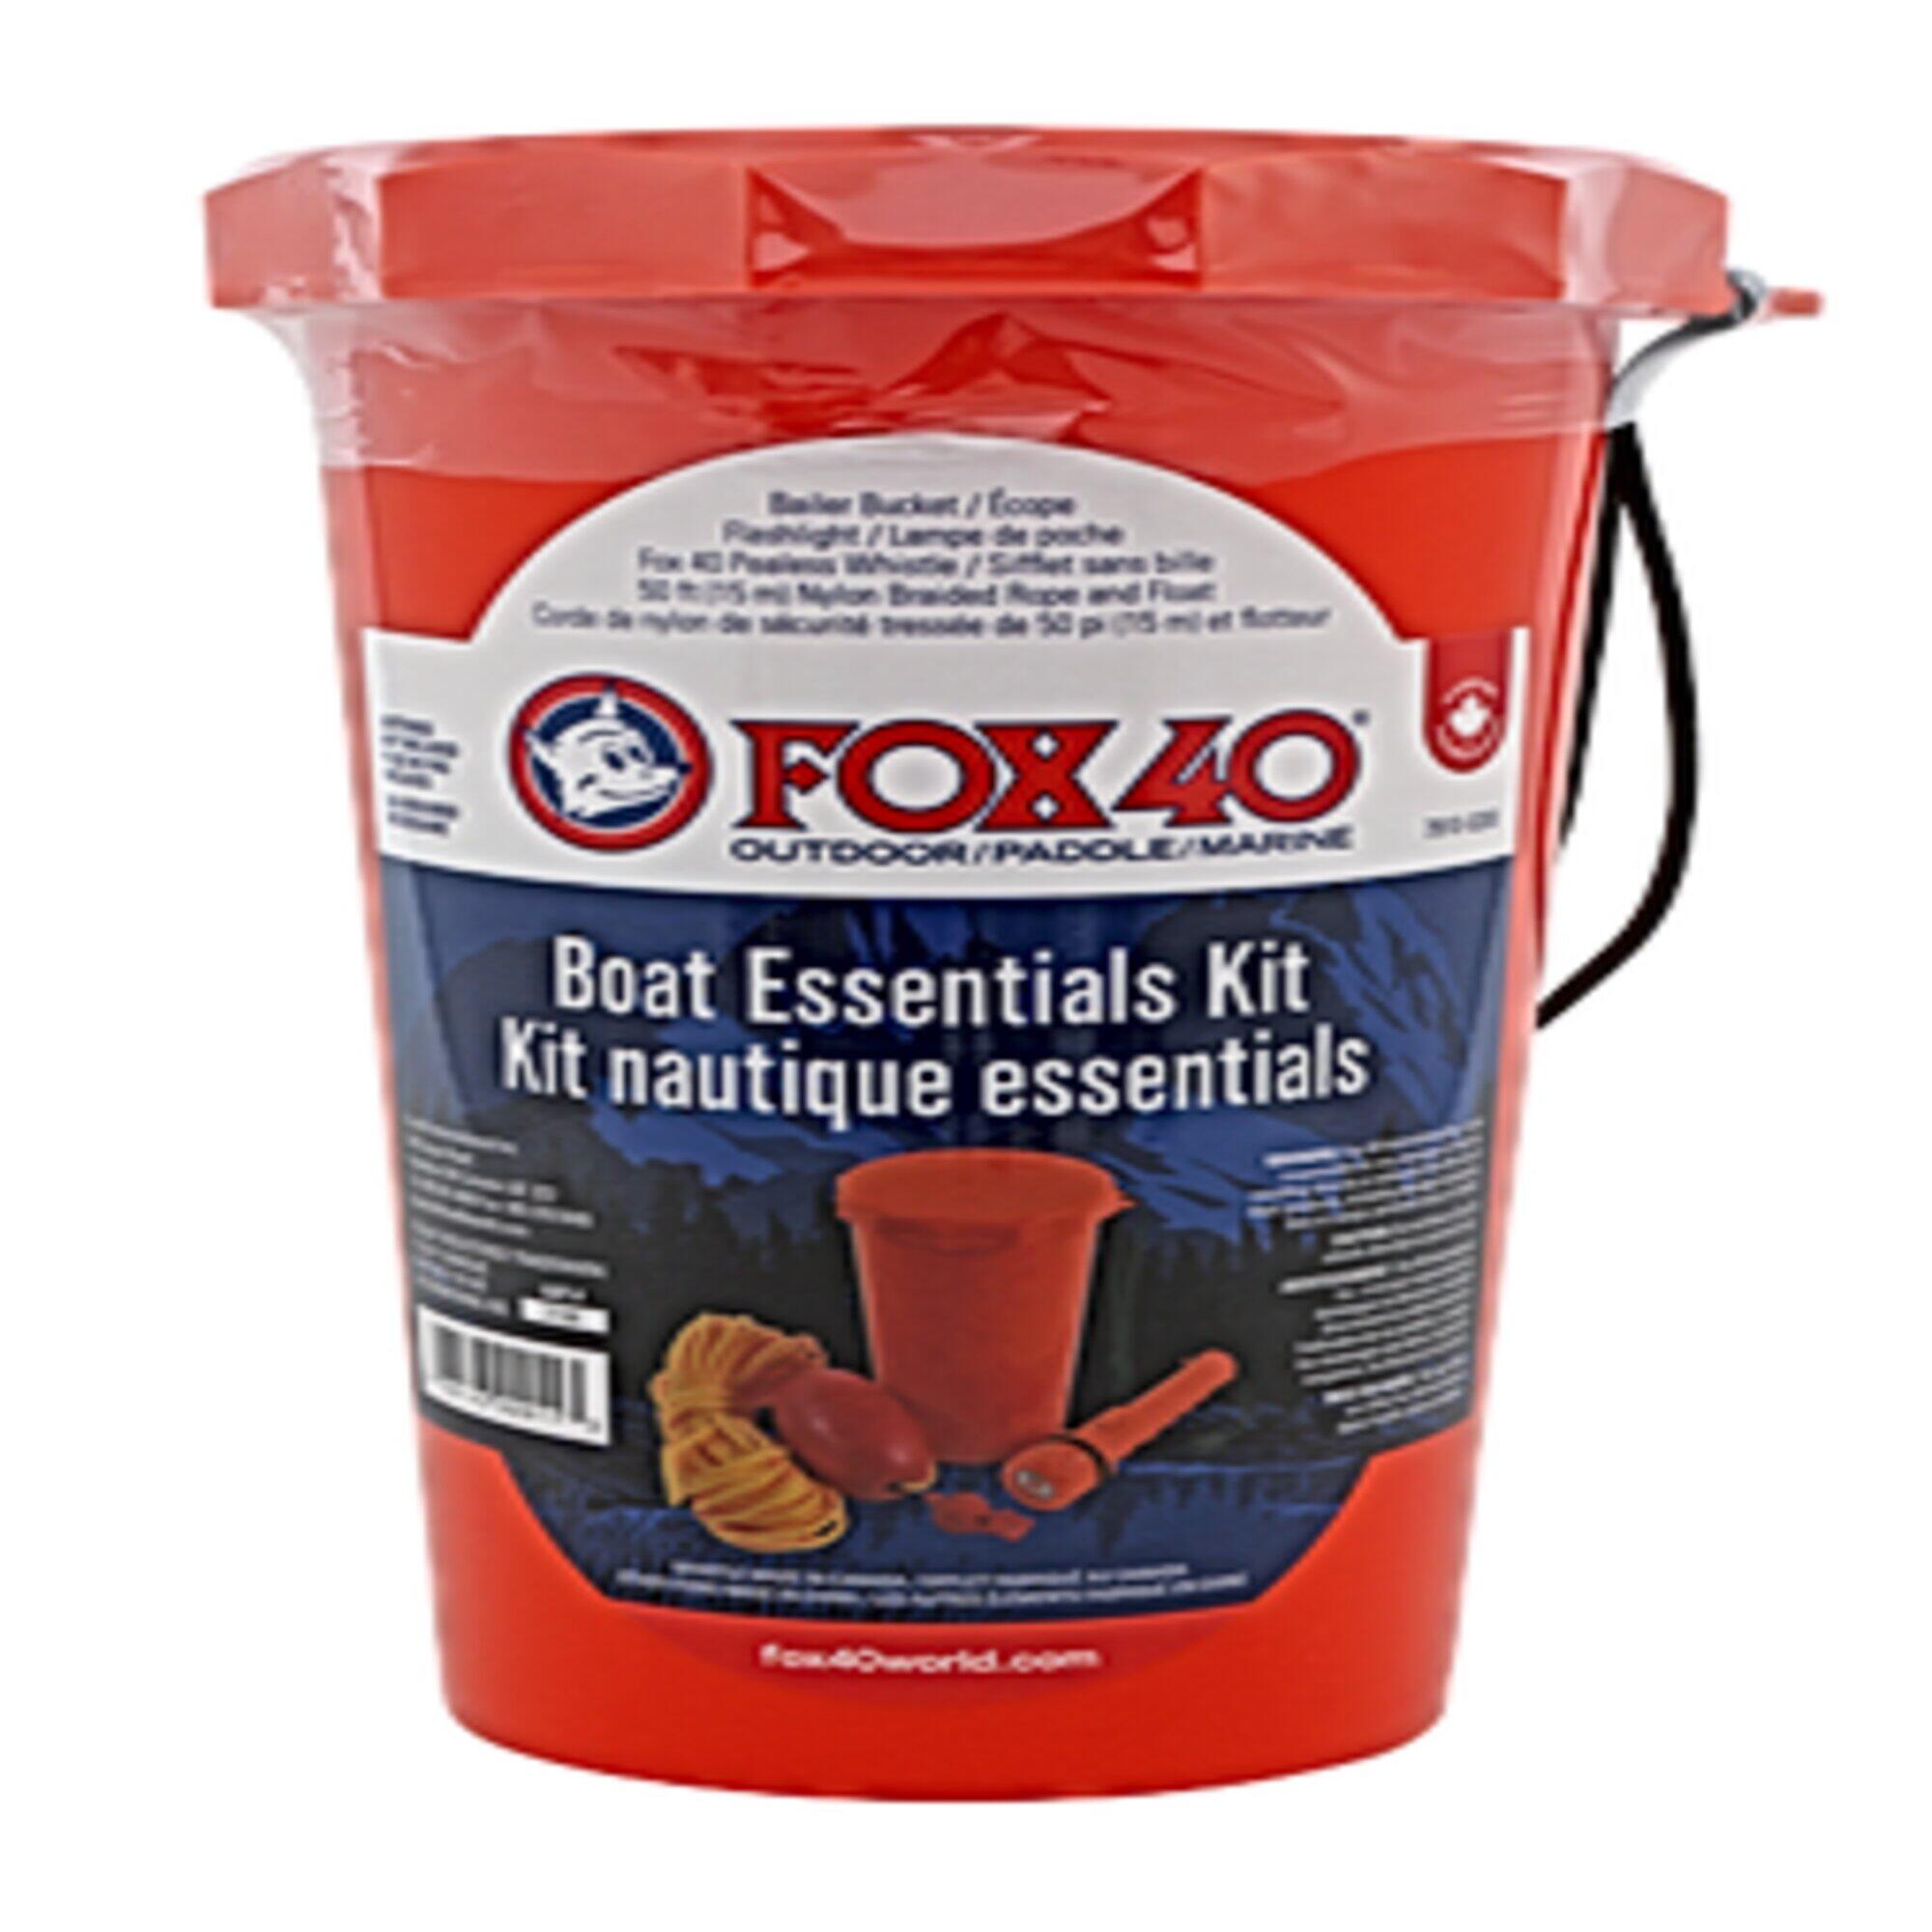 Image of Boat Safety Kit - FOX 40